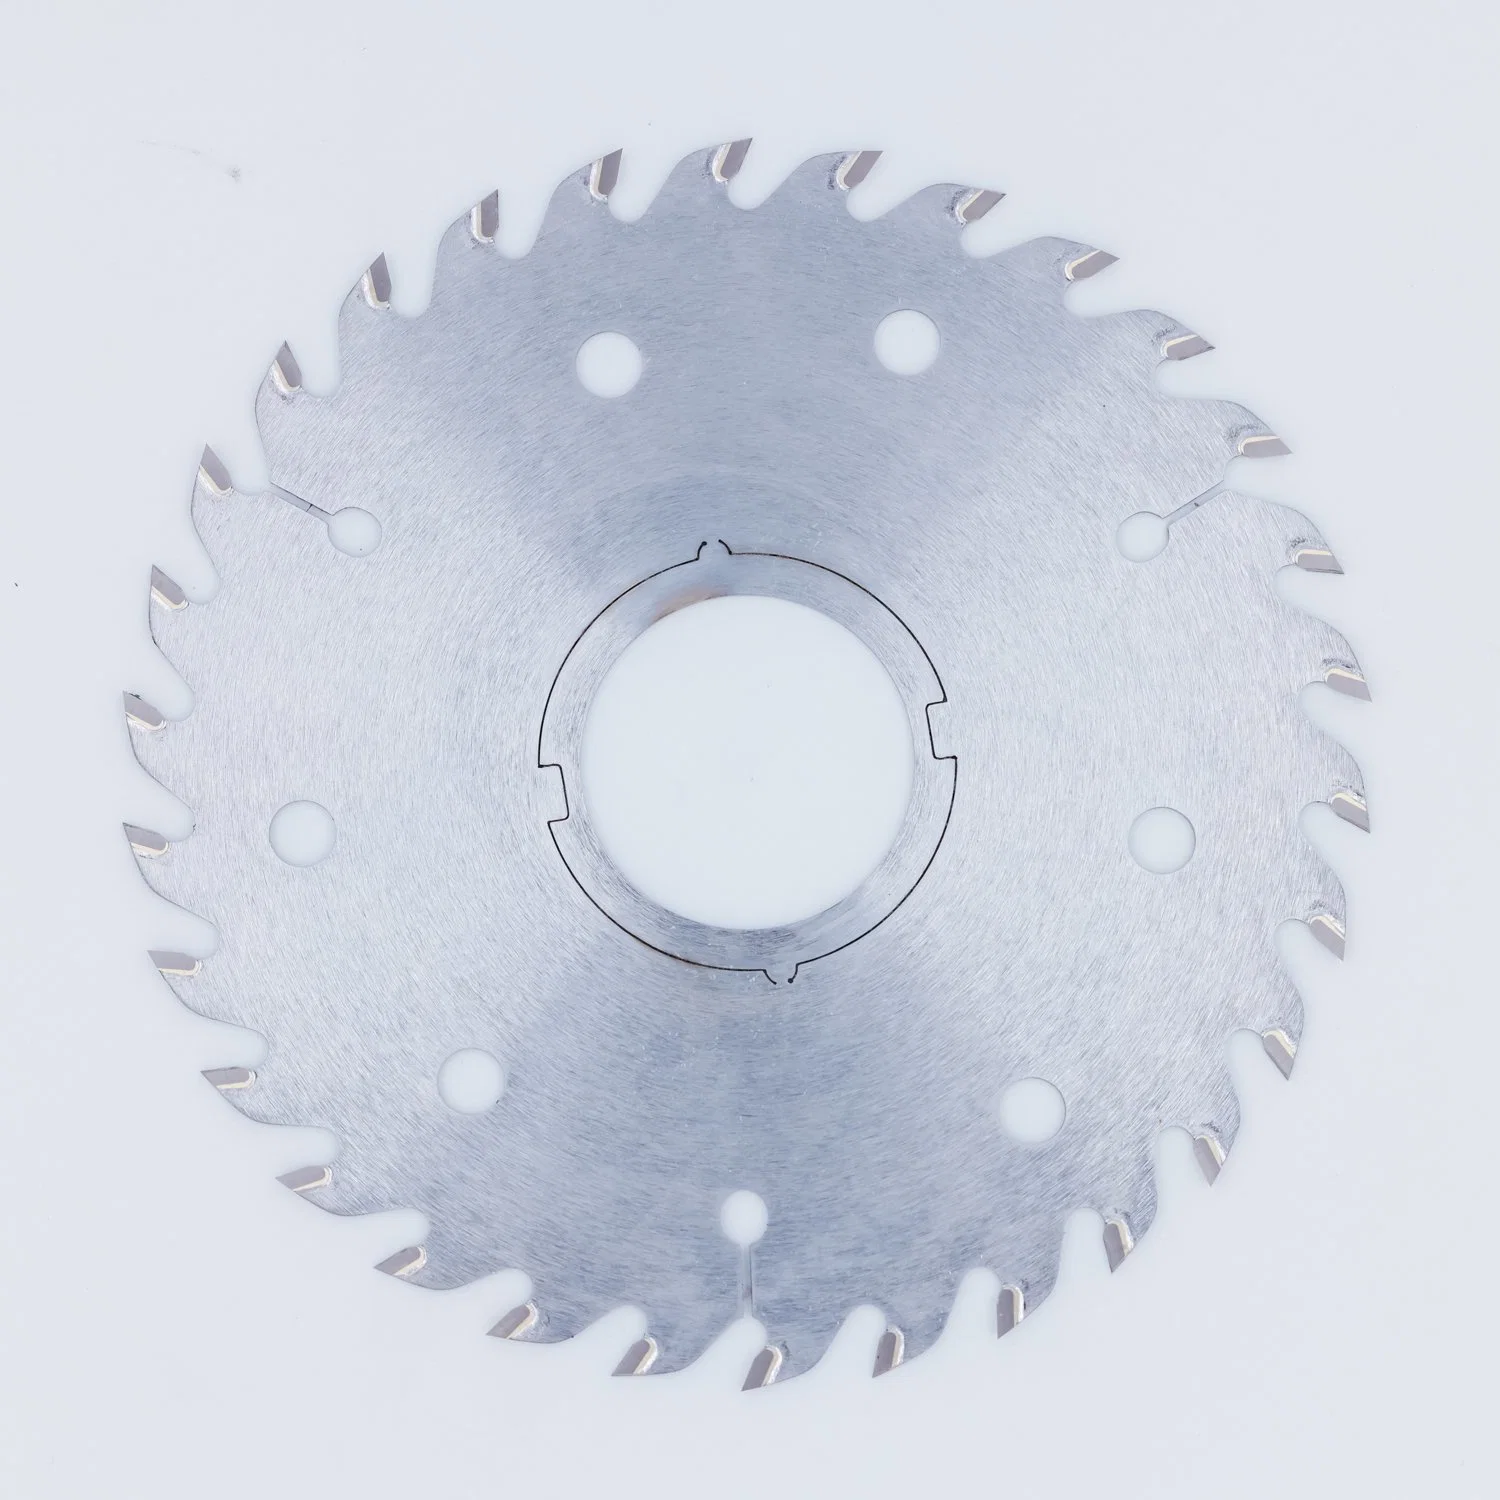 230mm Tct Carbide Multi Ripping Circular Saw Blade for Wood Working